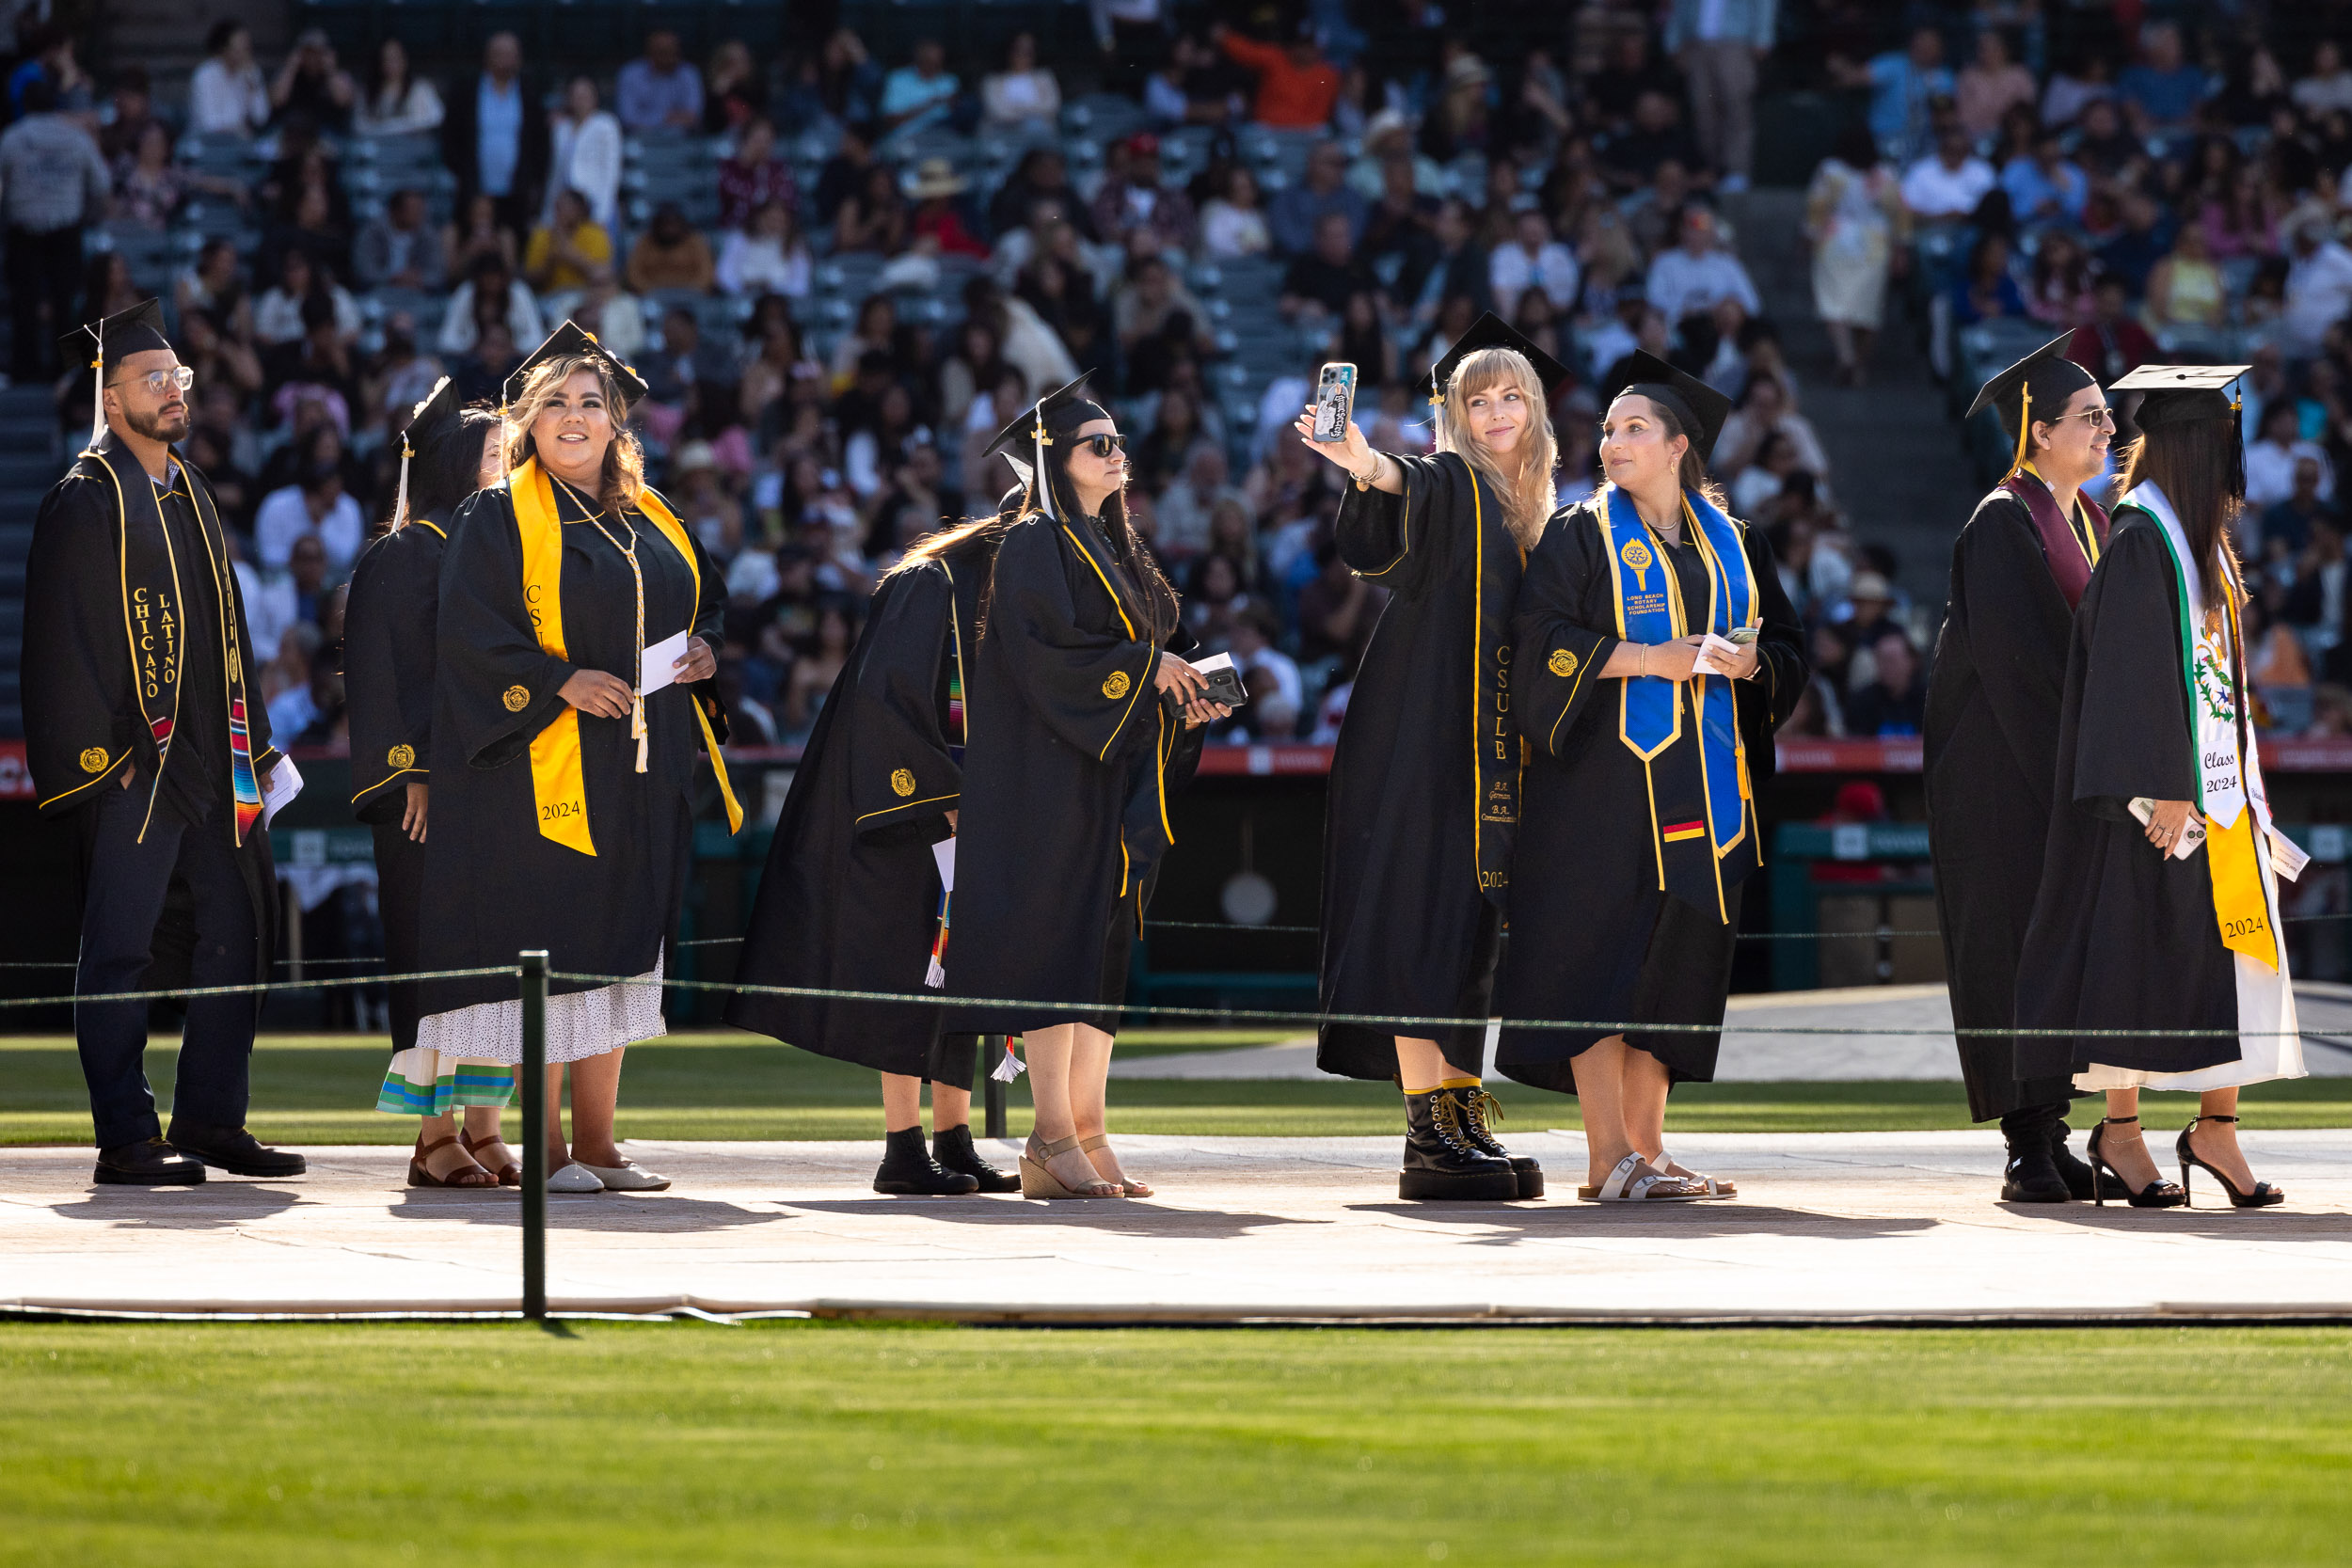 Students lining up to walk on the Commencement stage